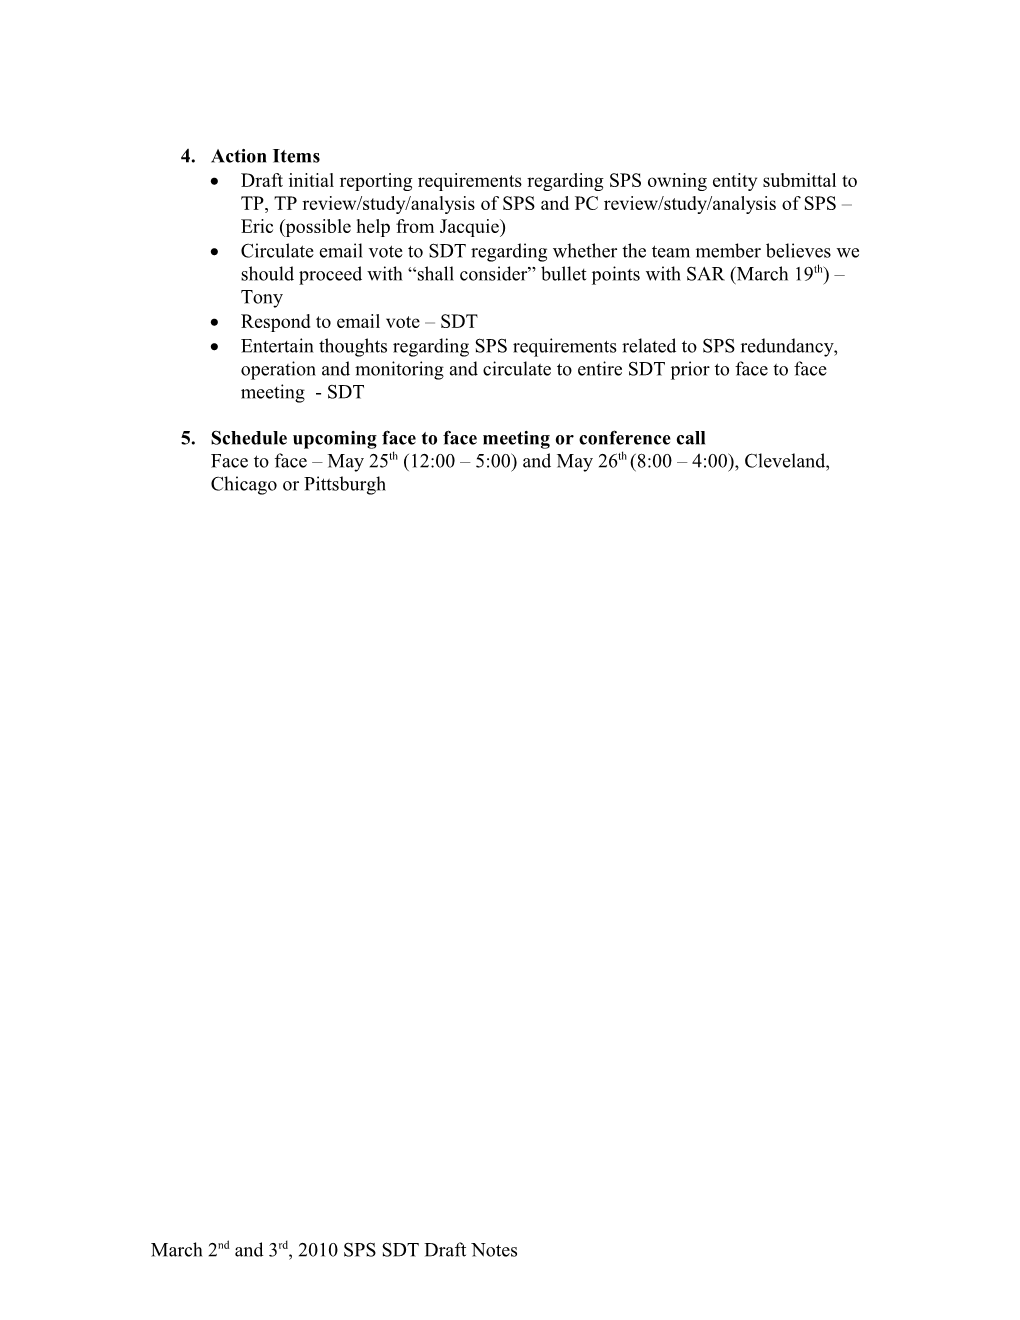 Special Protection System (SPS) SDT Cleveland Meeting Draft Notes